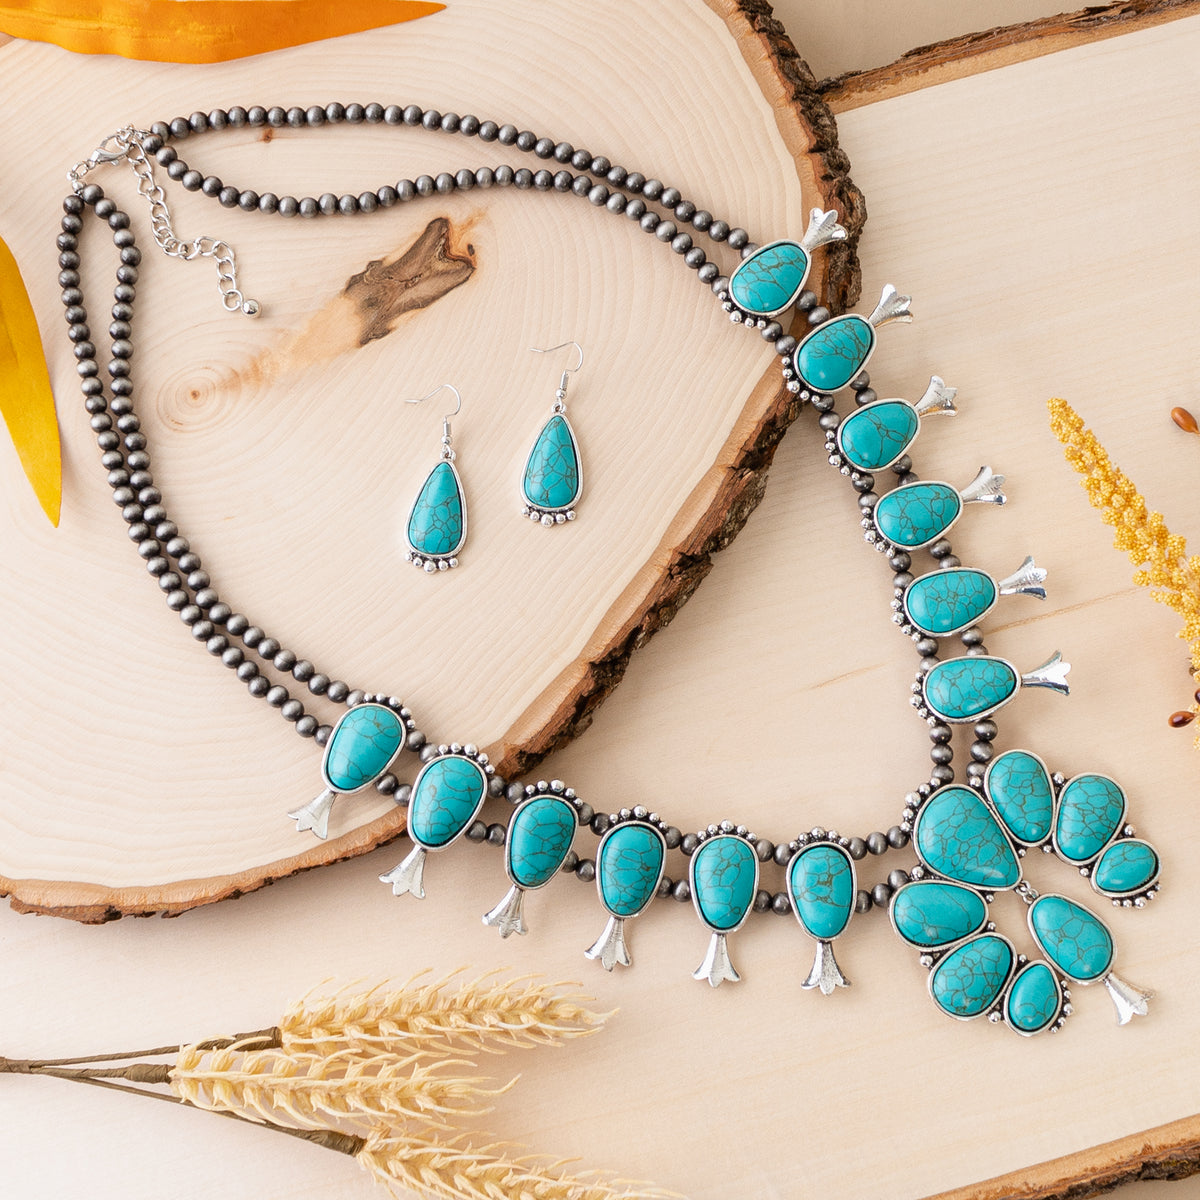 72685 - Western Turquoise Necklace - Turquoise & Silver - Fashion Jewelry Wholesale